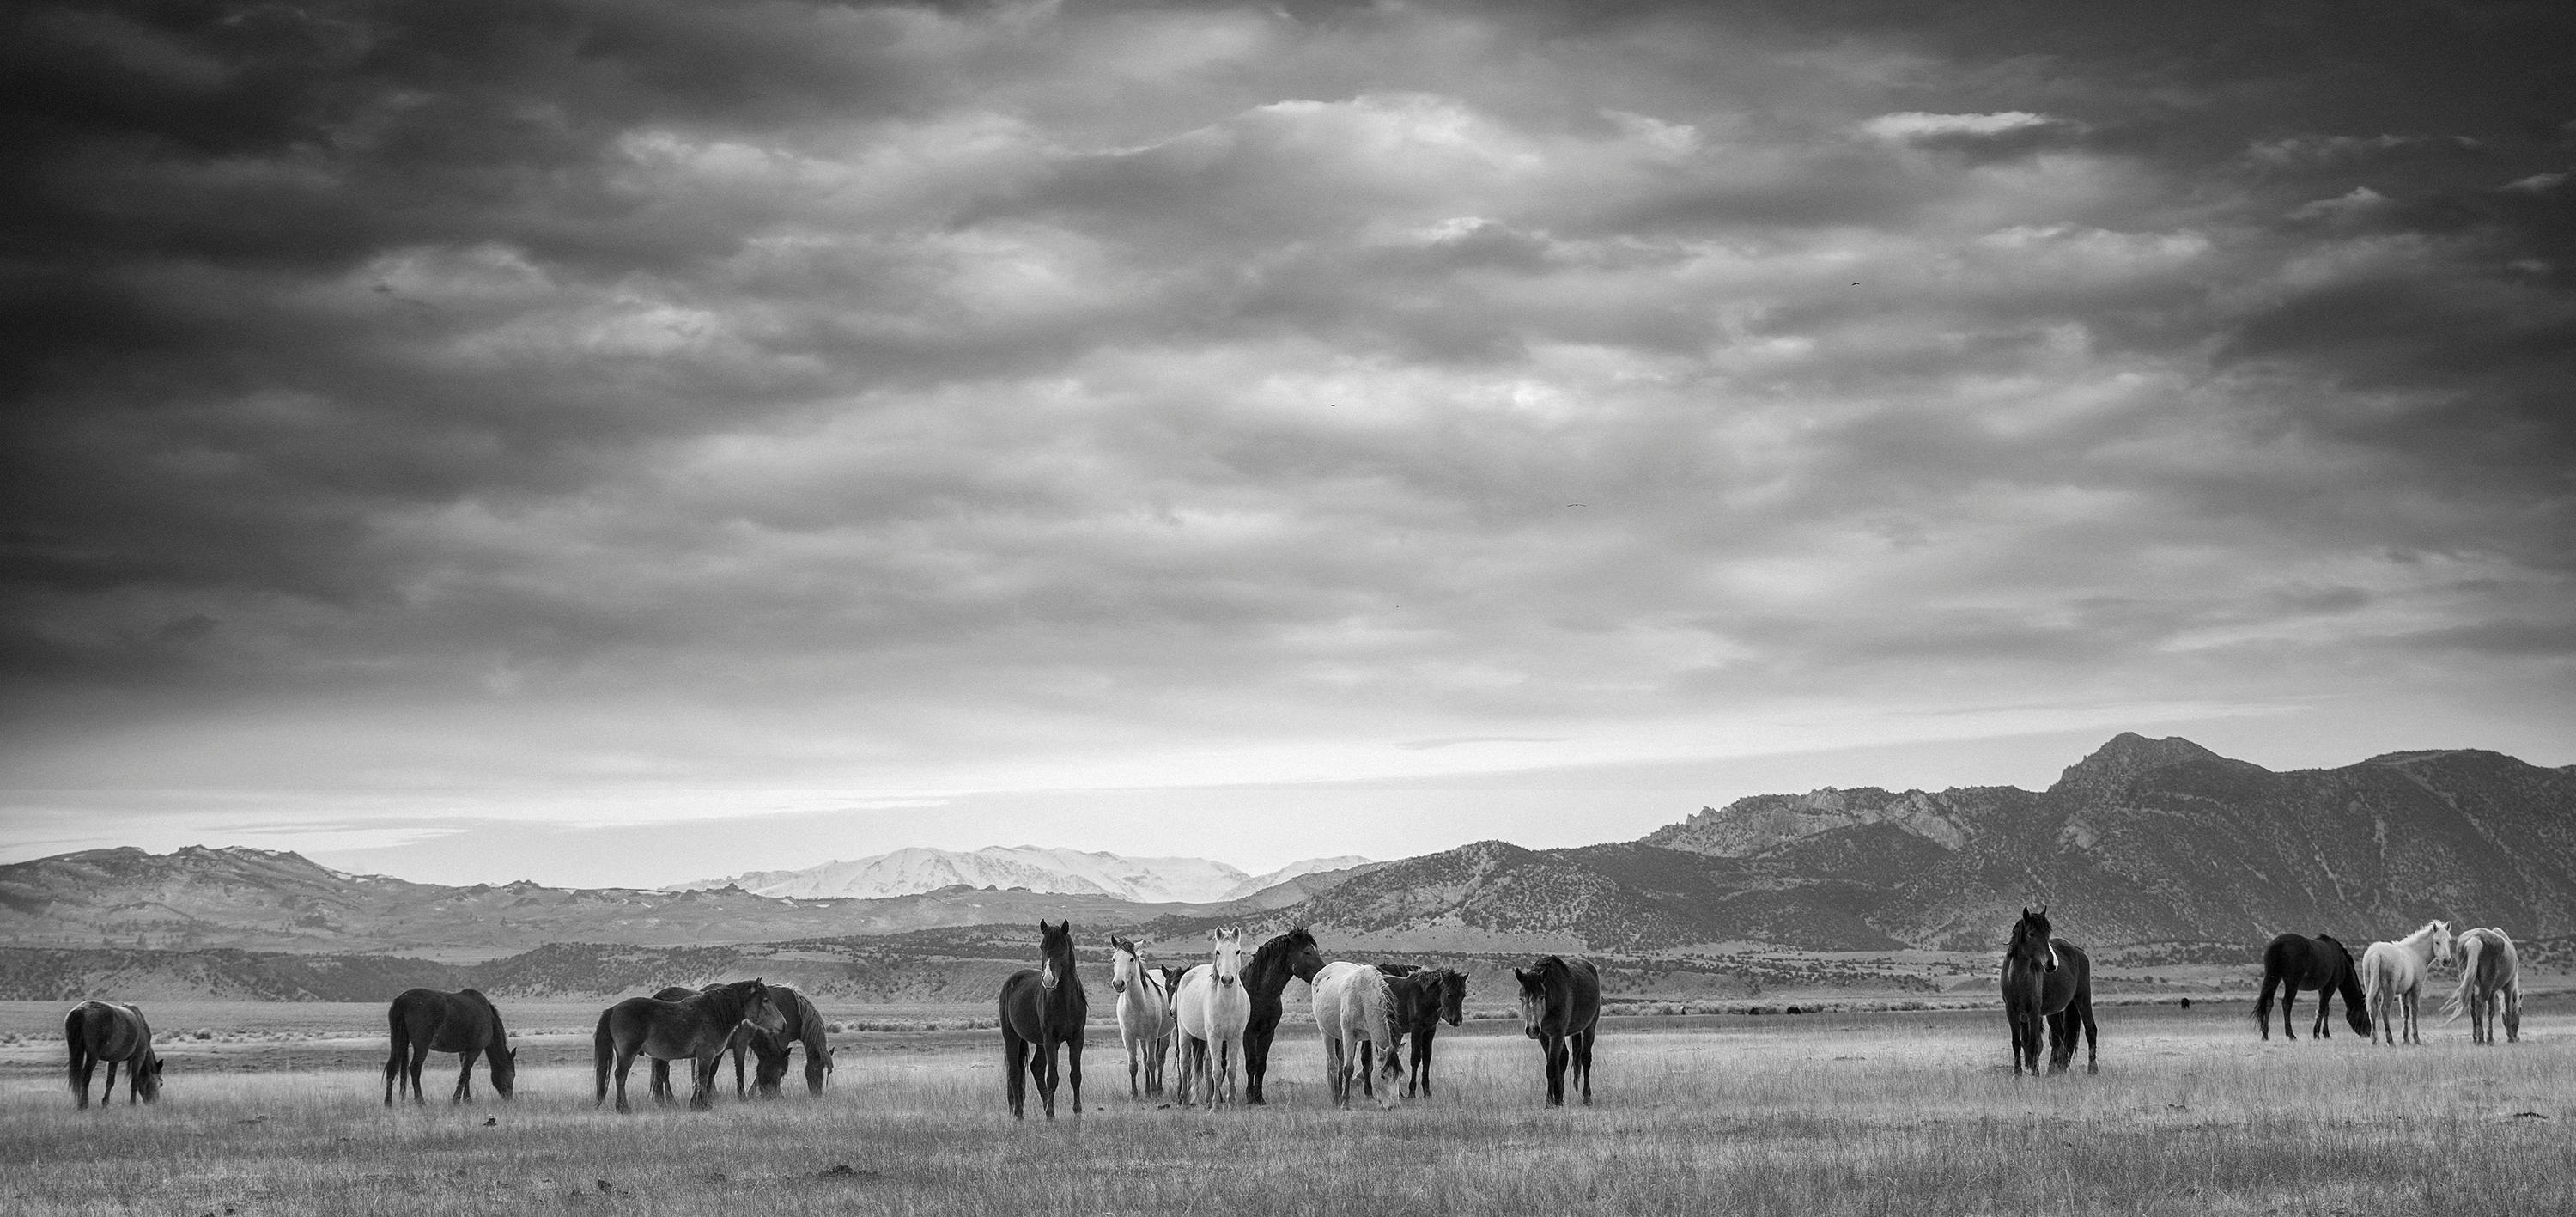 Shane Russeck Color Photograph - "Gangs All Here" 30x20 Wild Horses Mustangs Black and White Photography Fine Art